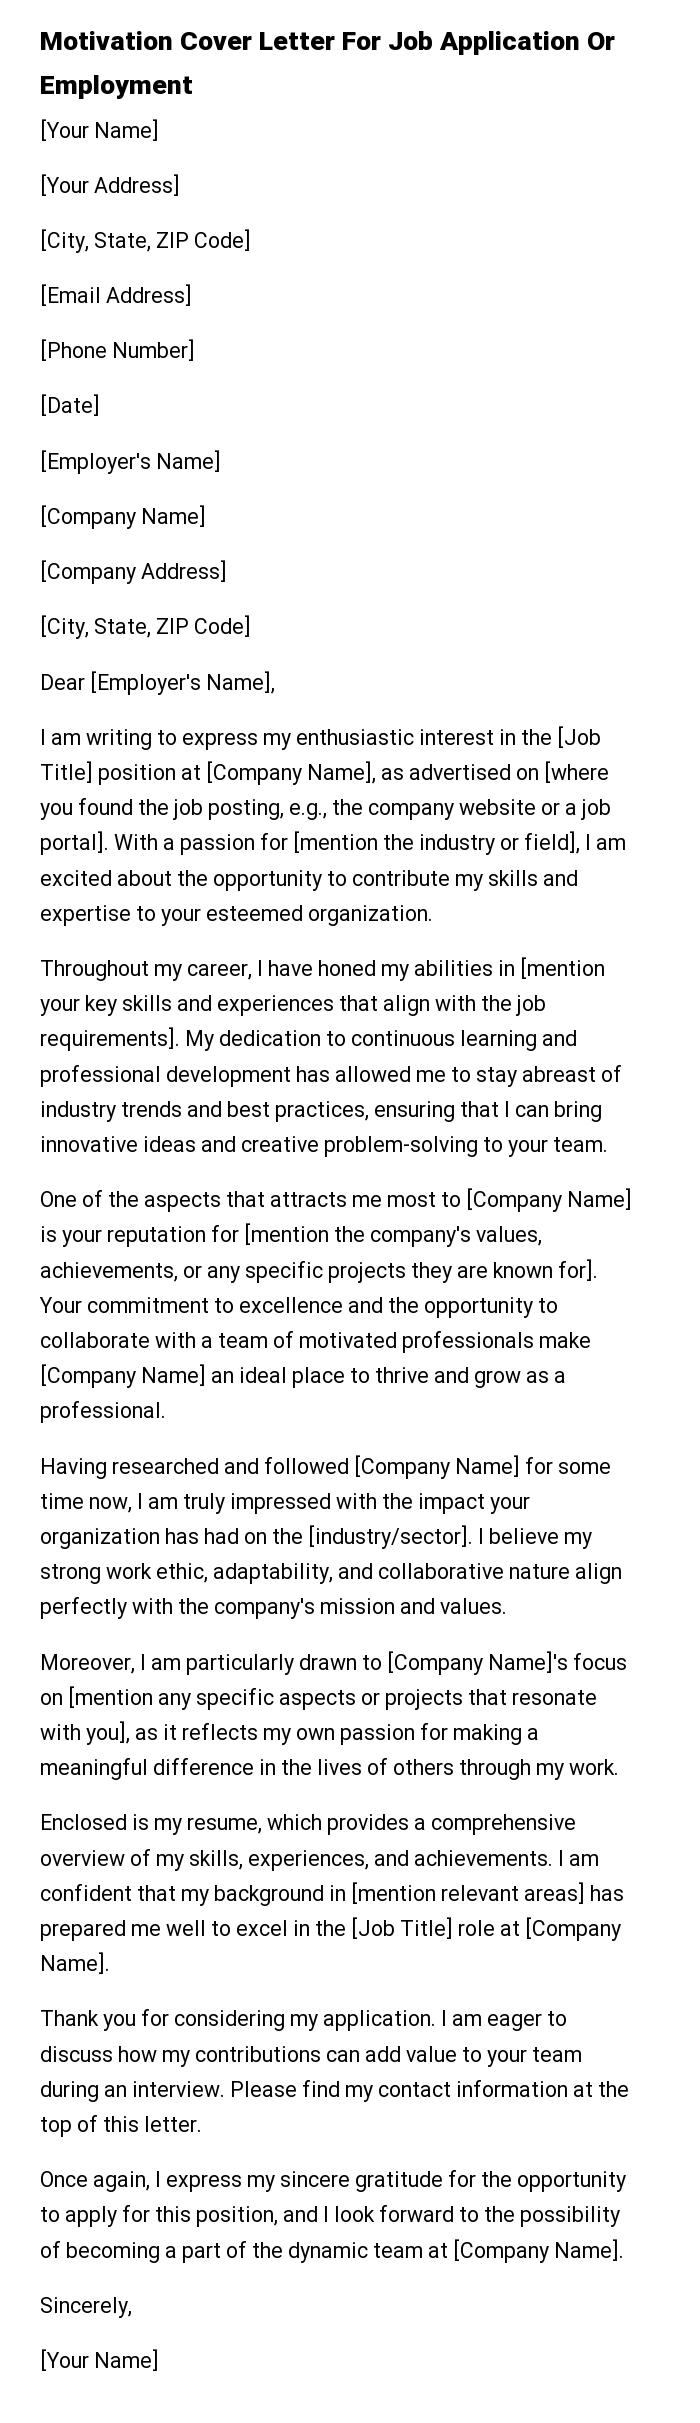 Motivation Cover Letter For Job Application Or Employment